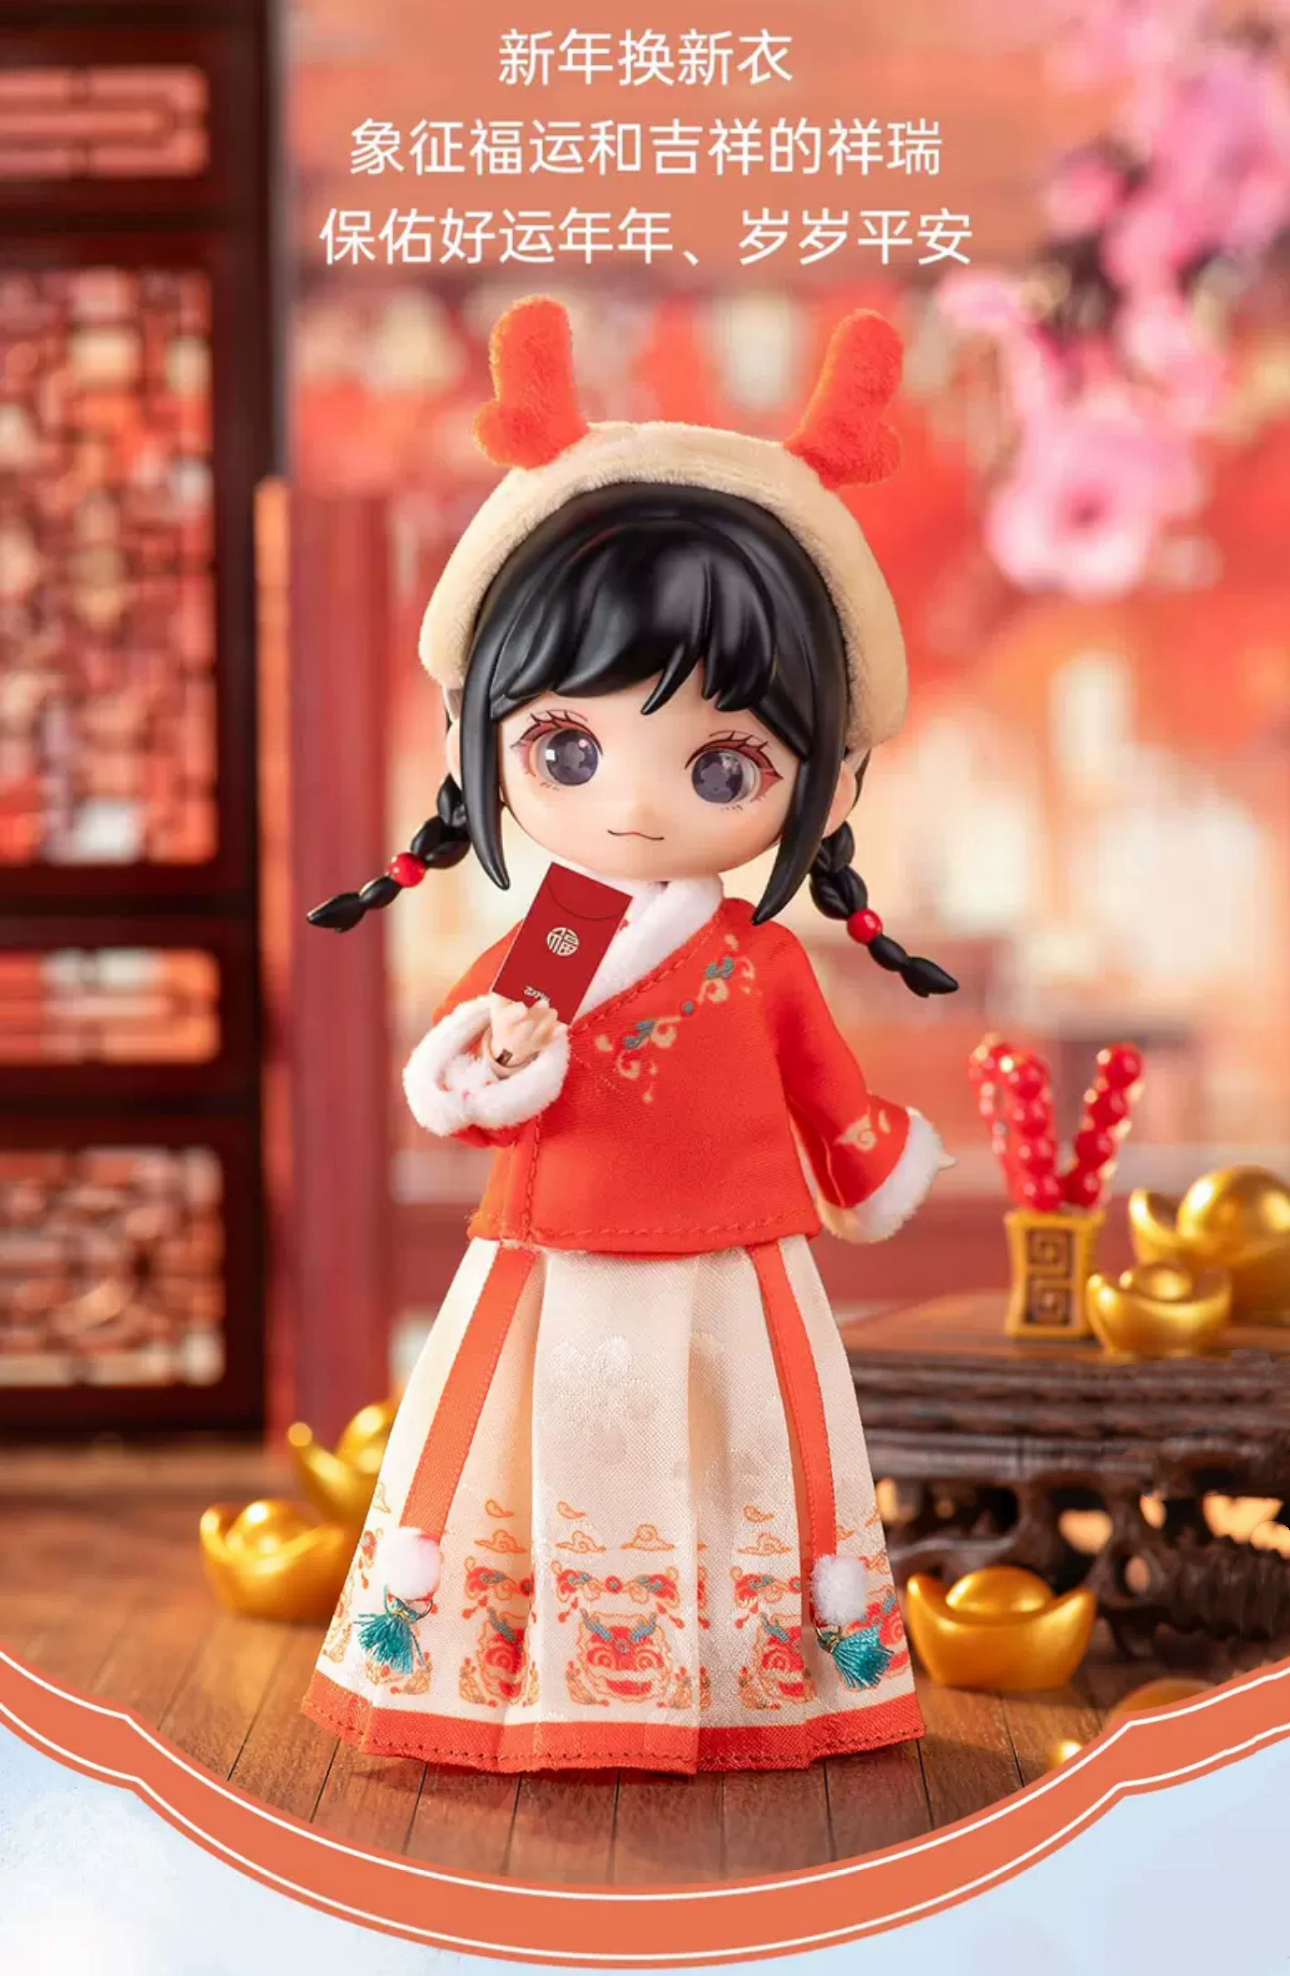 Simon Toys Liroro Summer Island | Chinese Dragon Year Limited Edition - 1/12 ob11 11cm BJD Doll Ball Joint Doll Collectible Toys